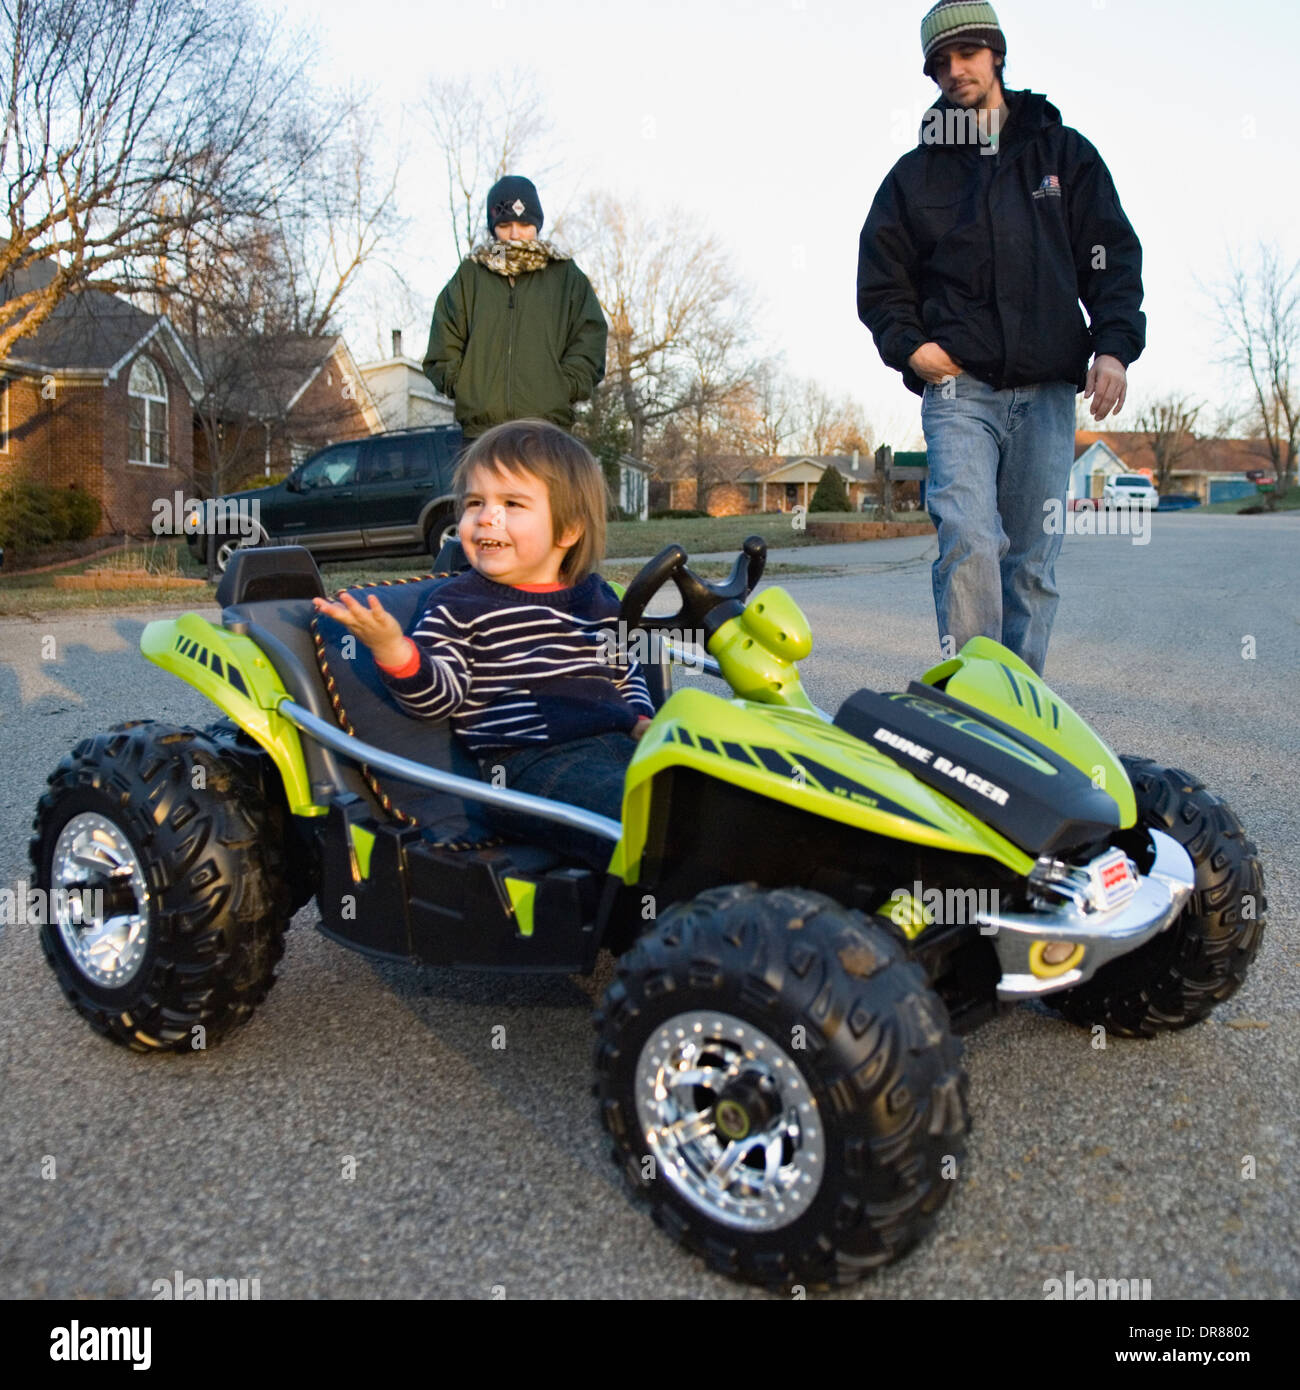 Toddler Driving Toy Dune Buggy While Parents Supervise Stock Photo